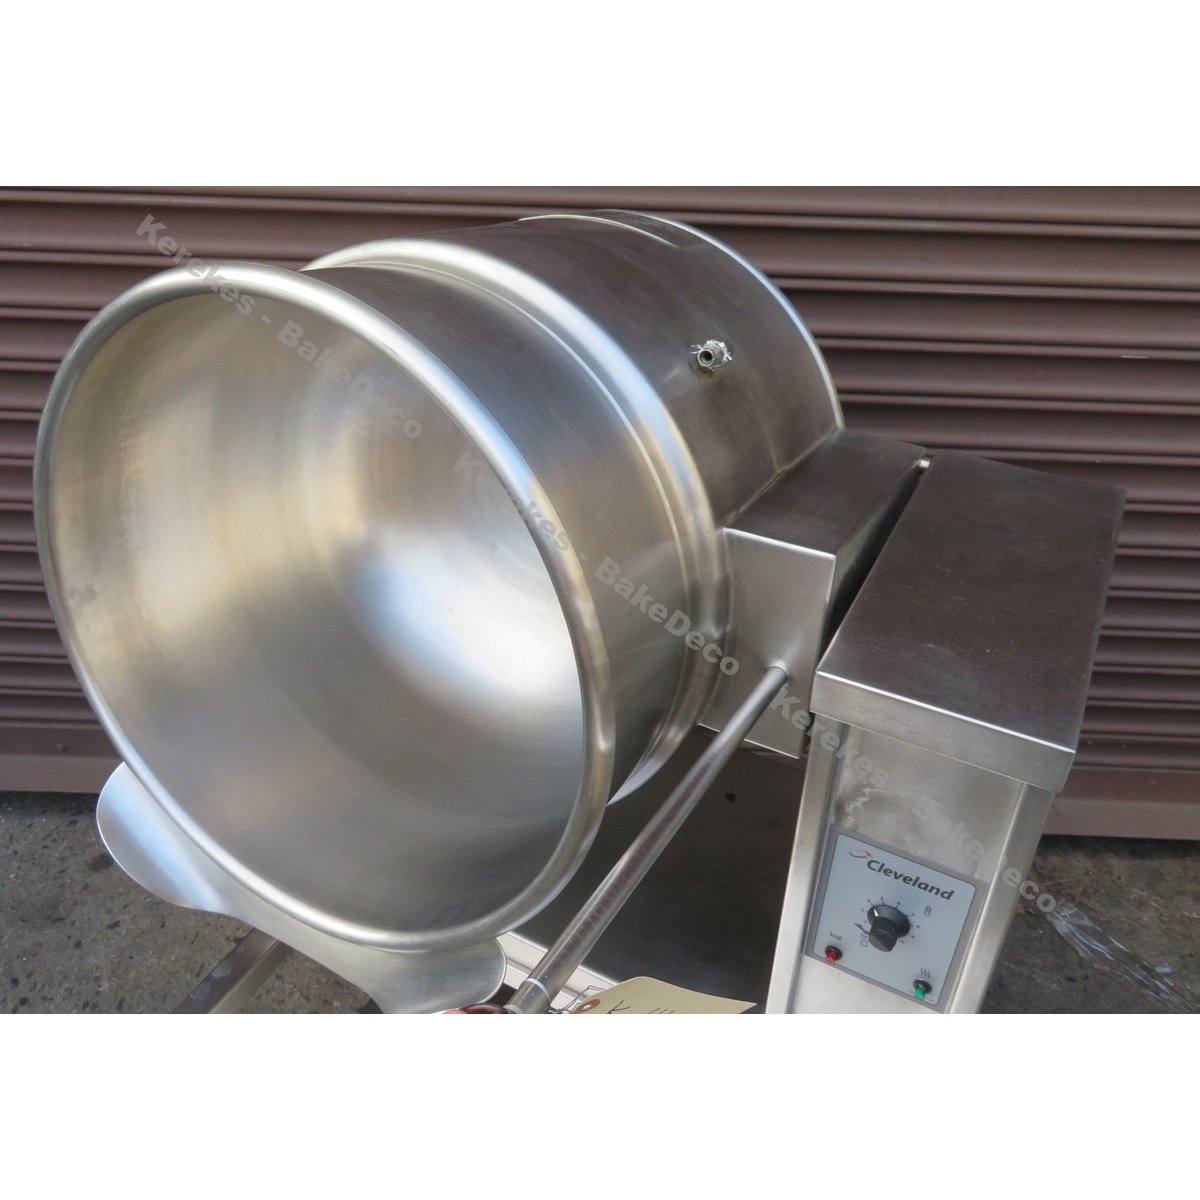 Cleveland Kettle 10 gal, Electric, KET-10T, Used Great Condition image 2